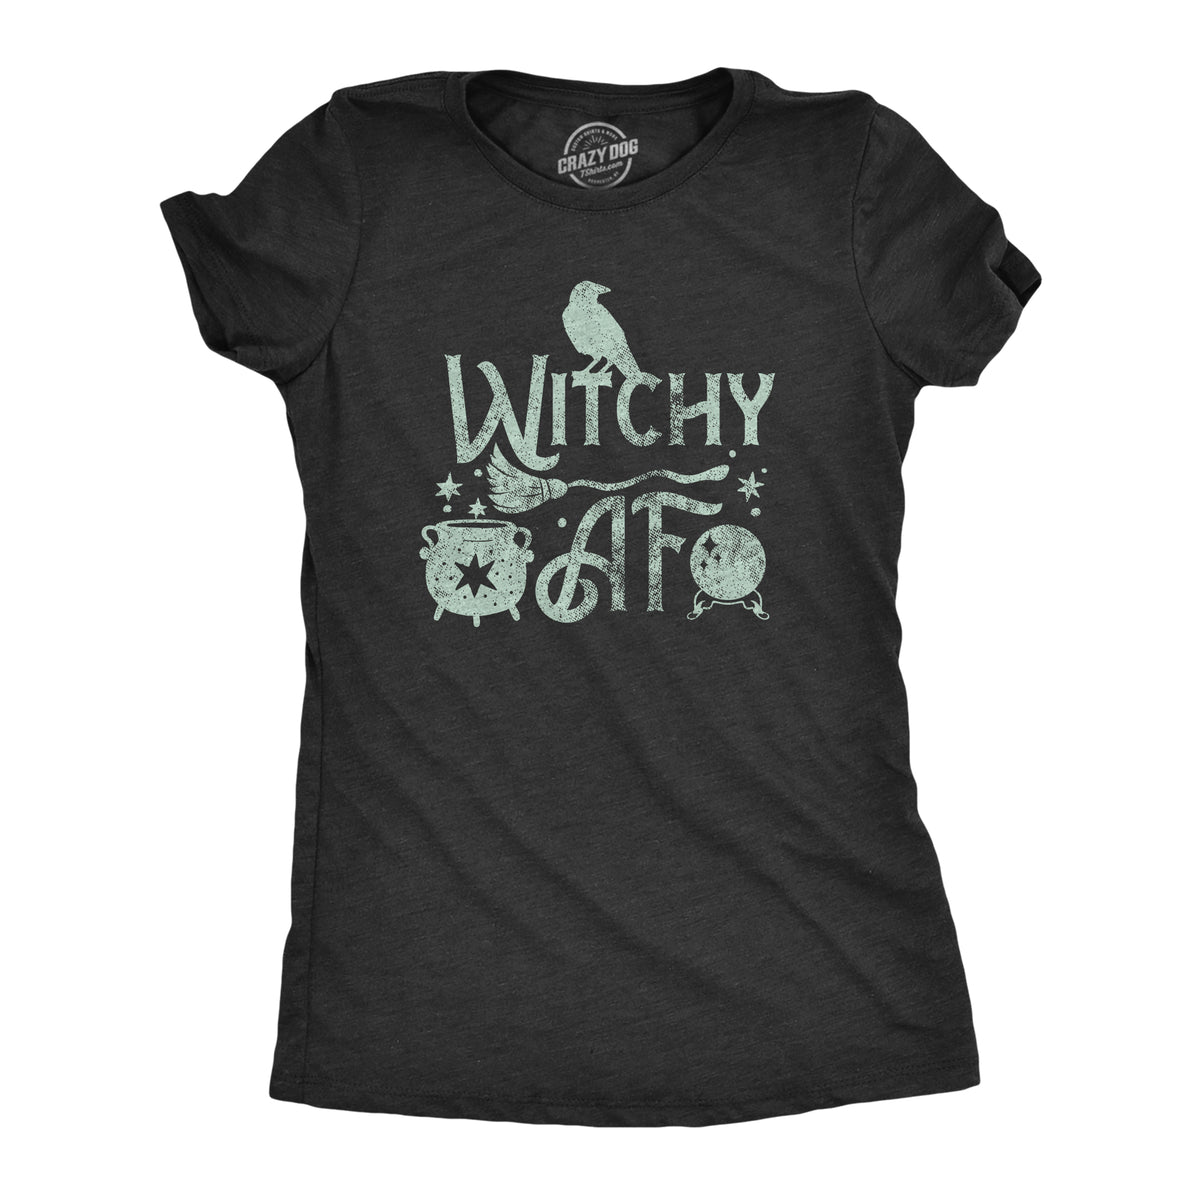 Funny Heather Black - WITCHY Witchy AF Womens T Shirt Nerdy halloween Tee